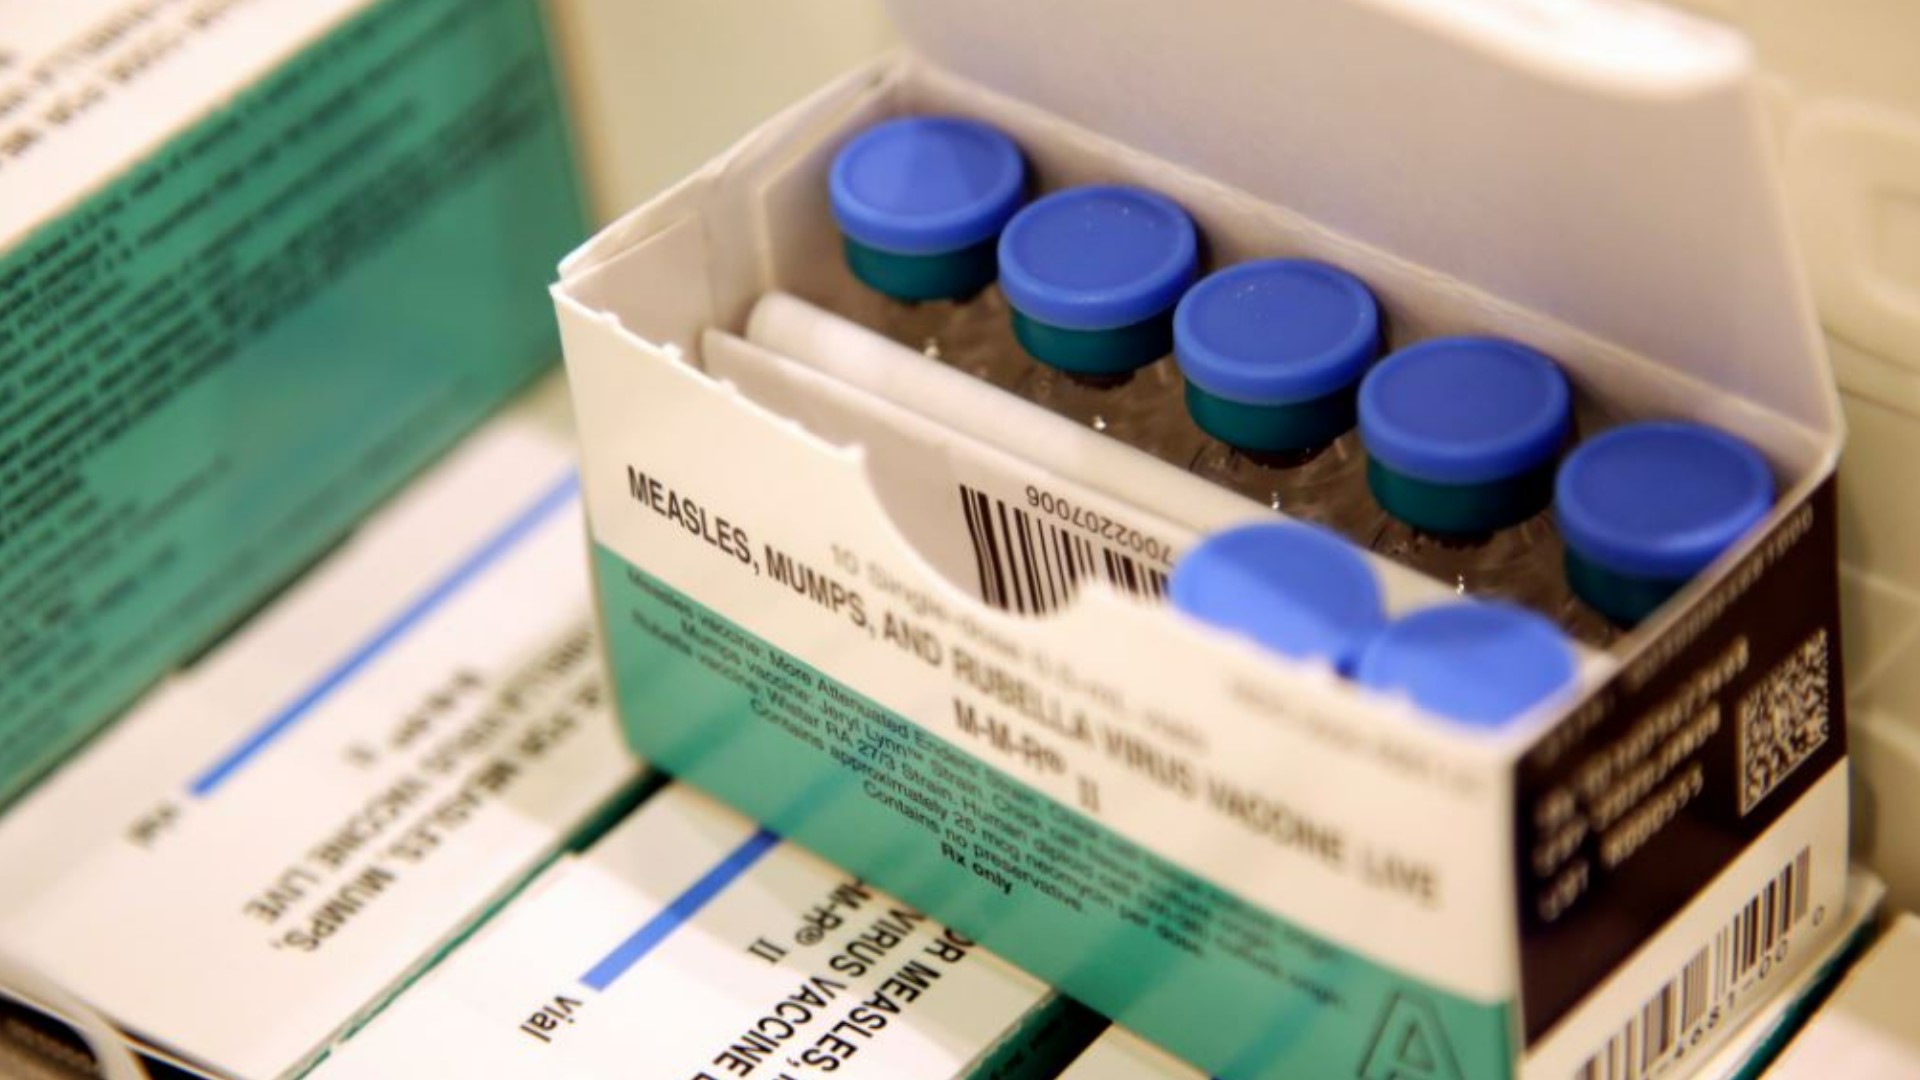 Columbus Public Health is investigating 24 cases of measles in children involving more child care facilities and schools.